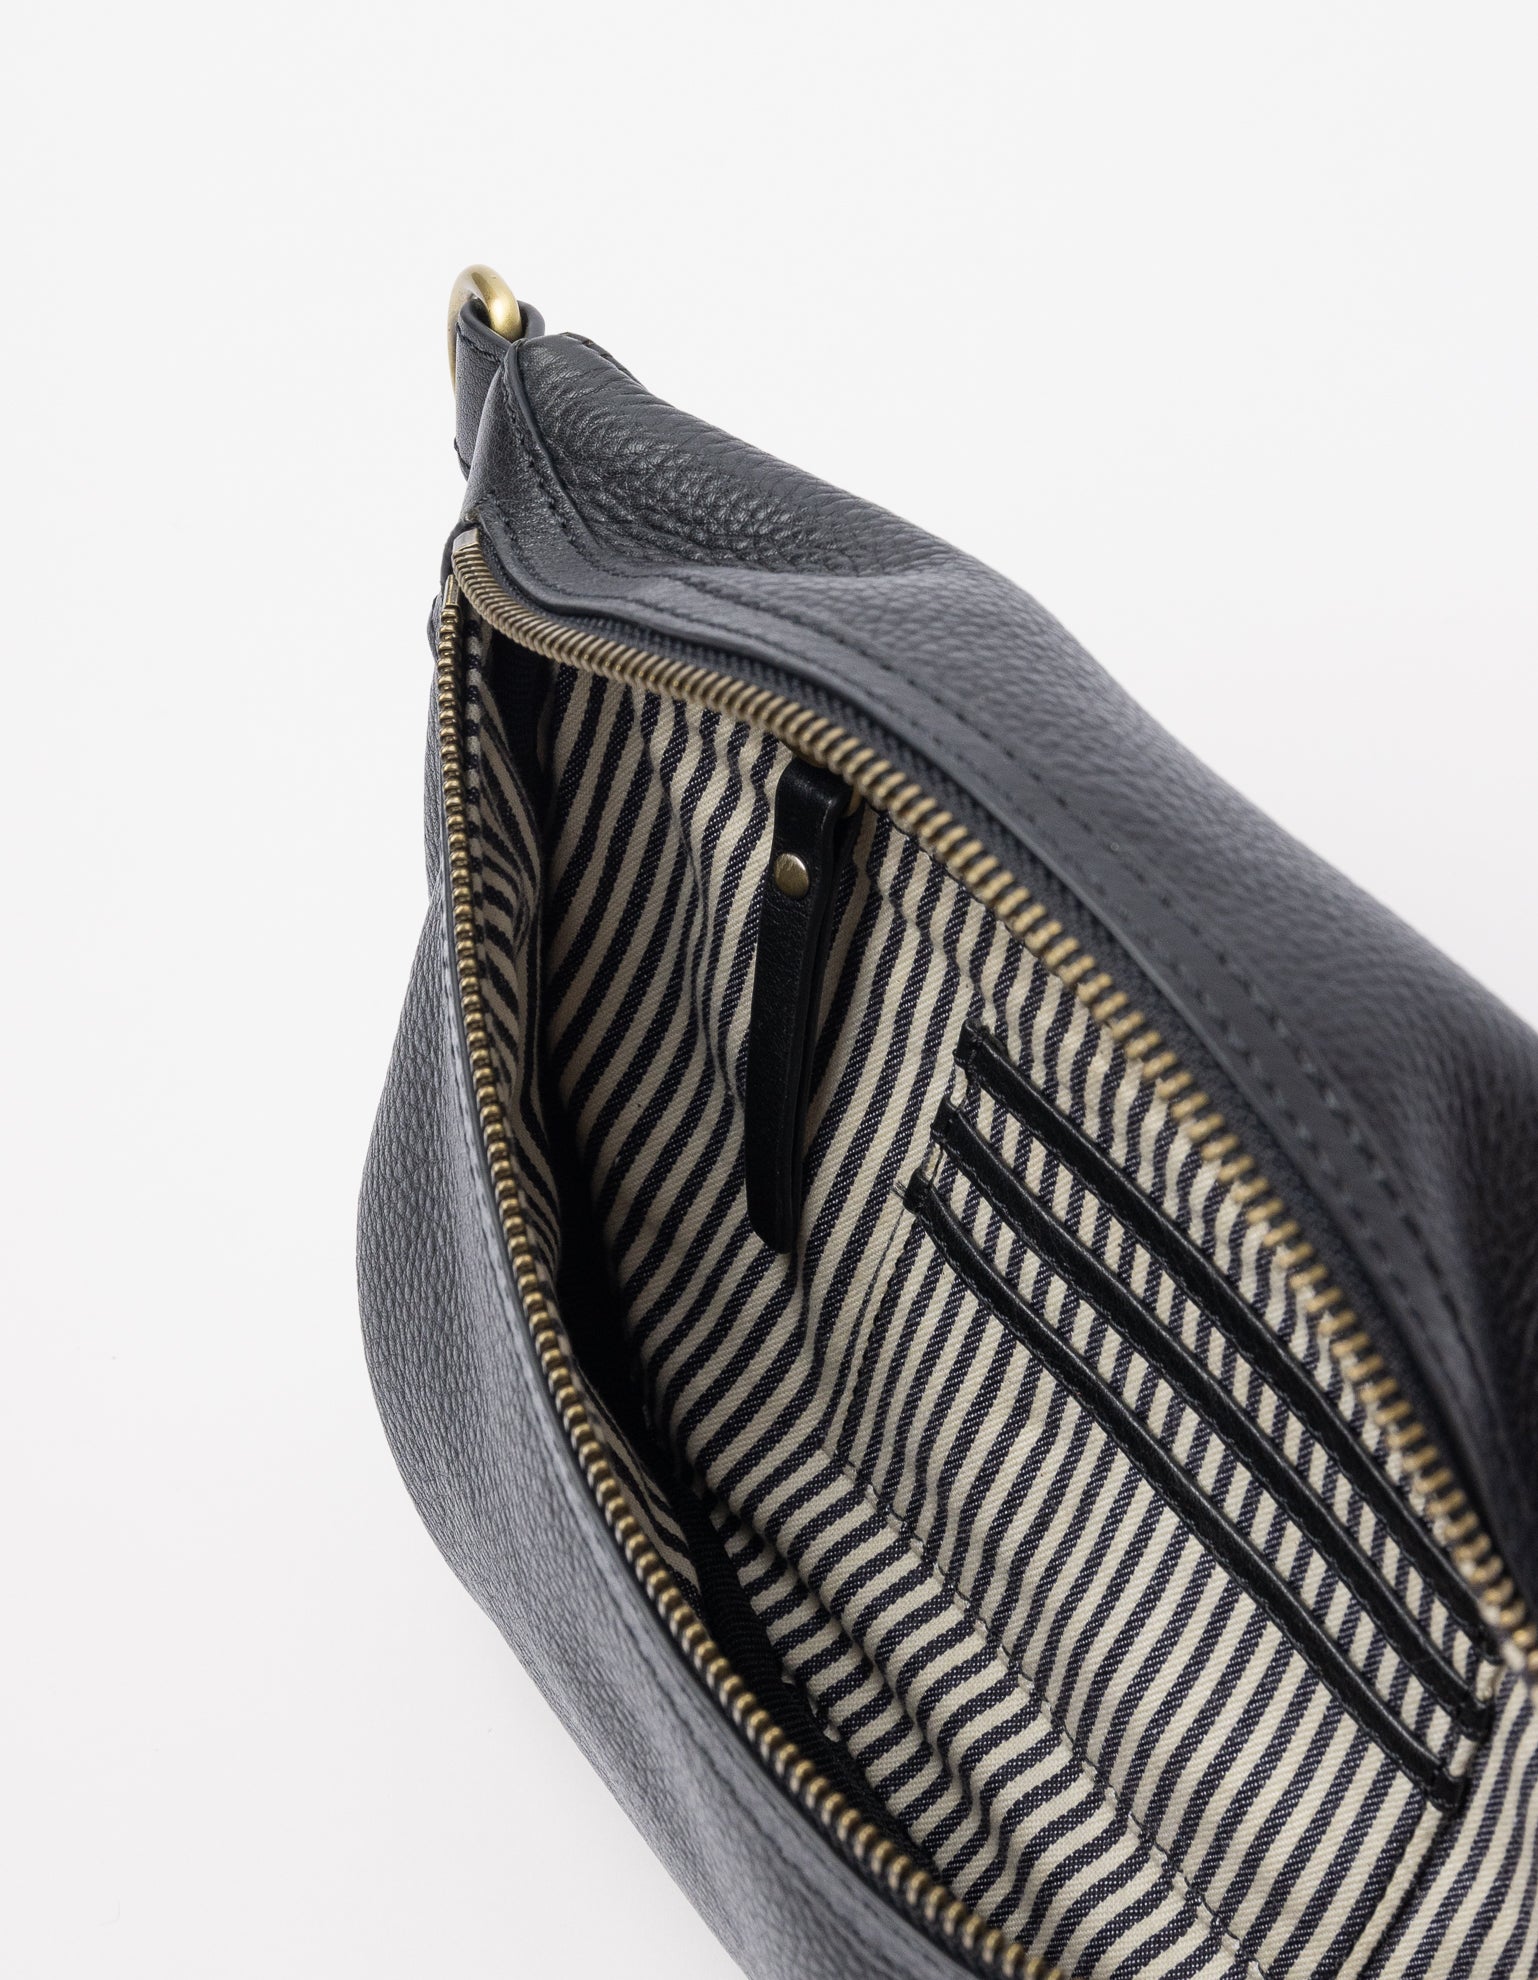 Milo, O My Bag's new soft grain bum bag, is the epitome of sleek practicality. This minimalist leather bum bag is designed for those who are always on the go and need their essentials handy. Ethically made in India.